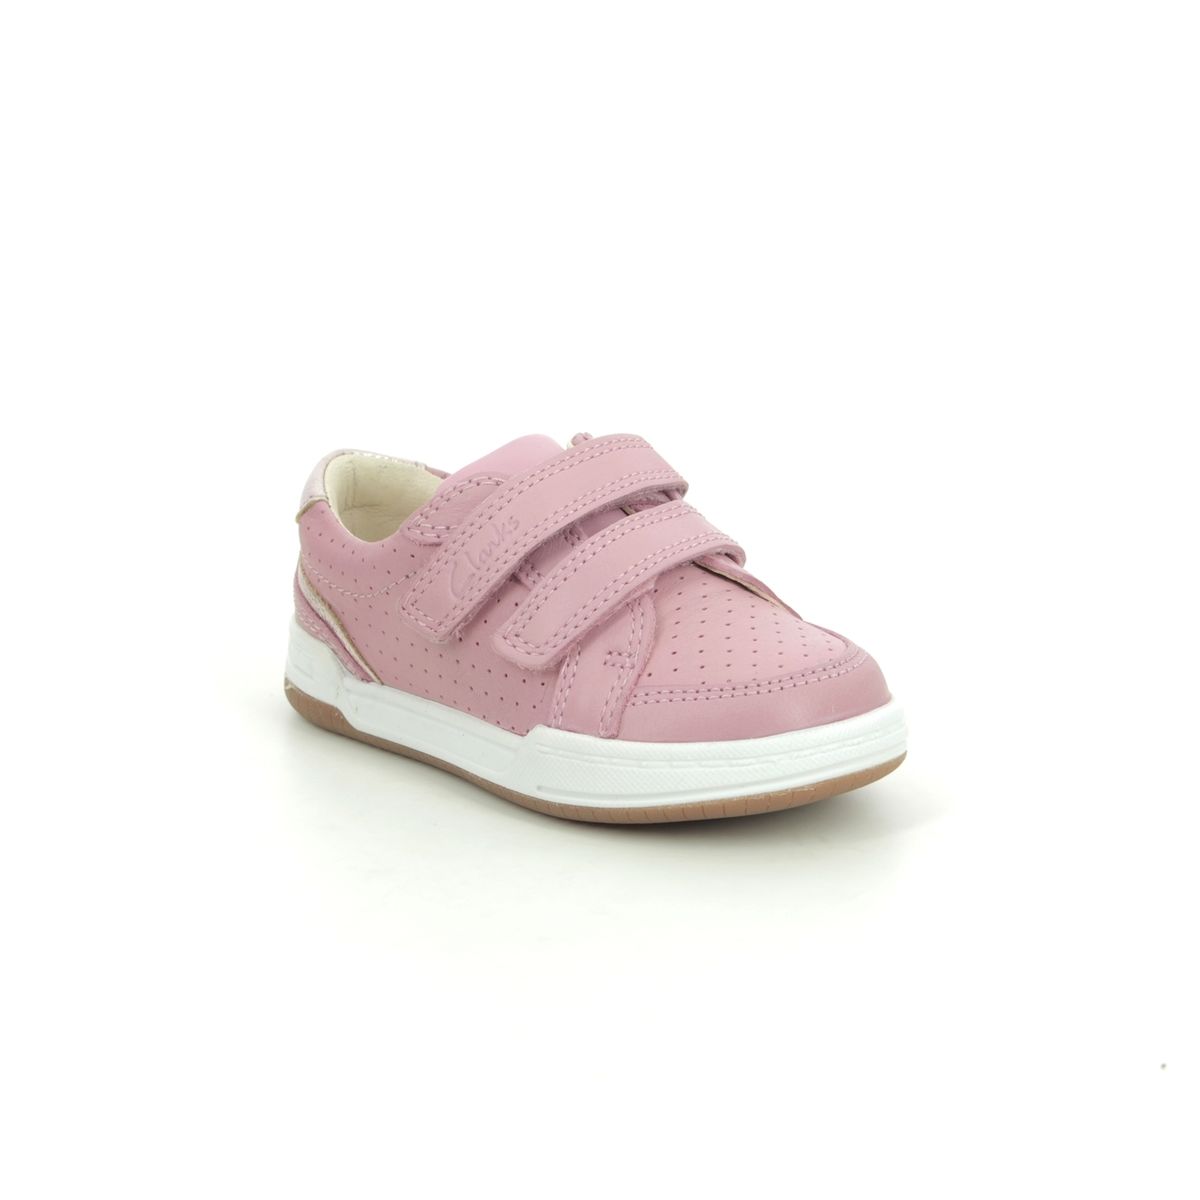 Clarks Fawn Solo T Pink Leather Kids First And Toddler 589895E In Size 4.5 In Plain Pink Leather E Width Fitting Narrow Fit For kids